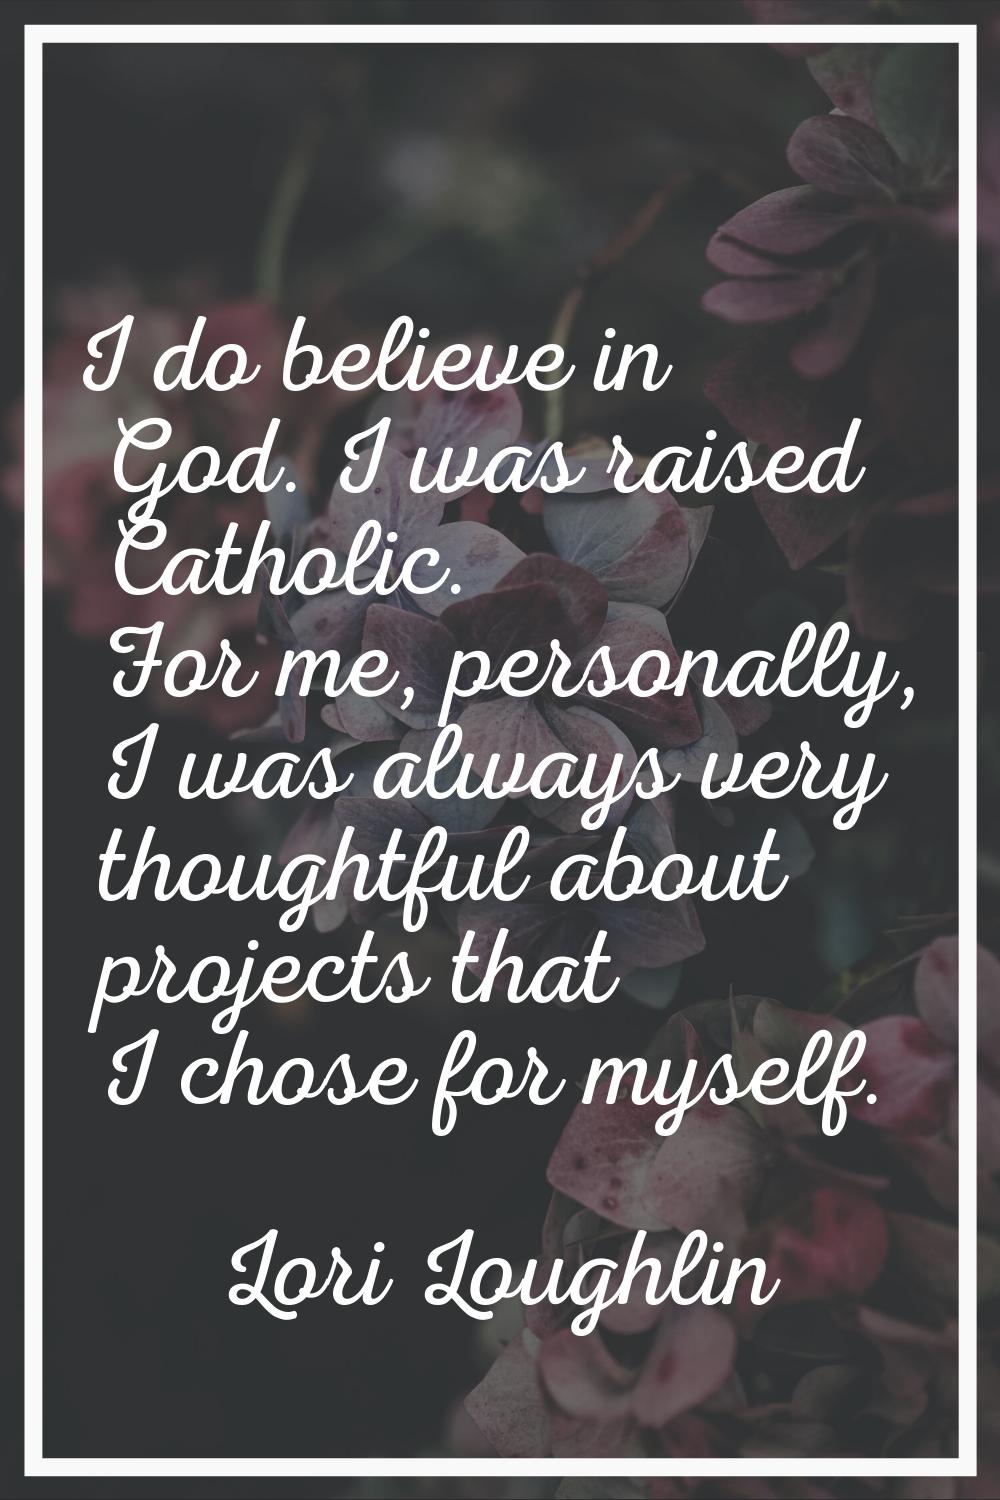 I do believe in God. I was raised Catholic. For me, personally, I was always very thoughtful about 